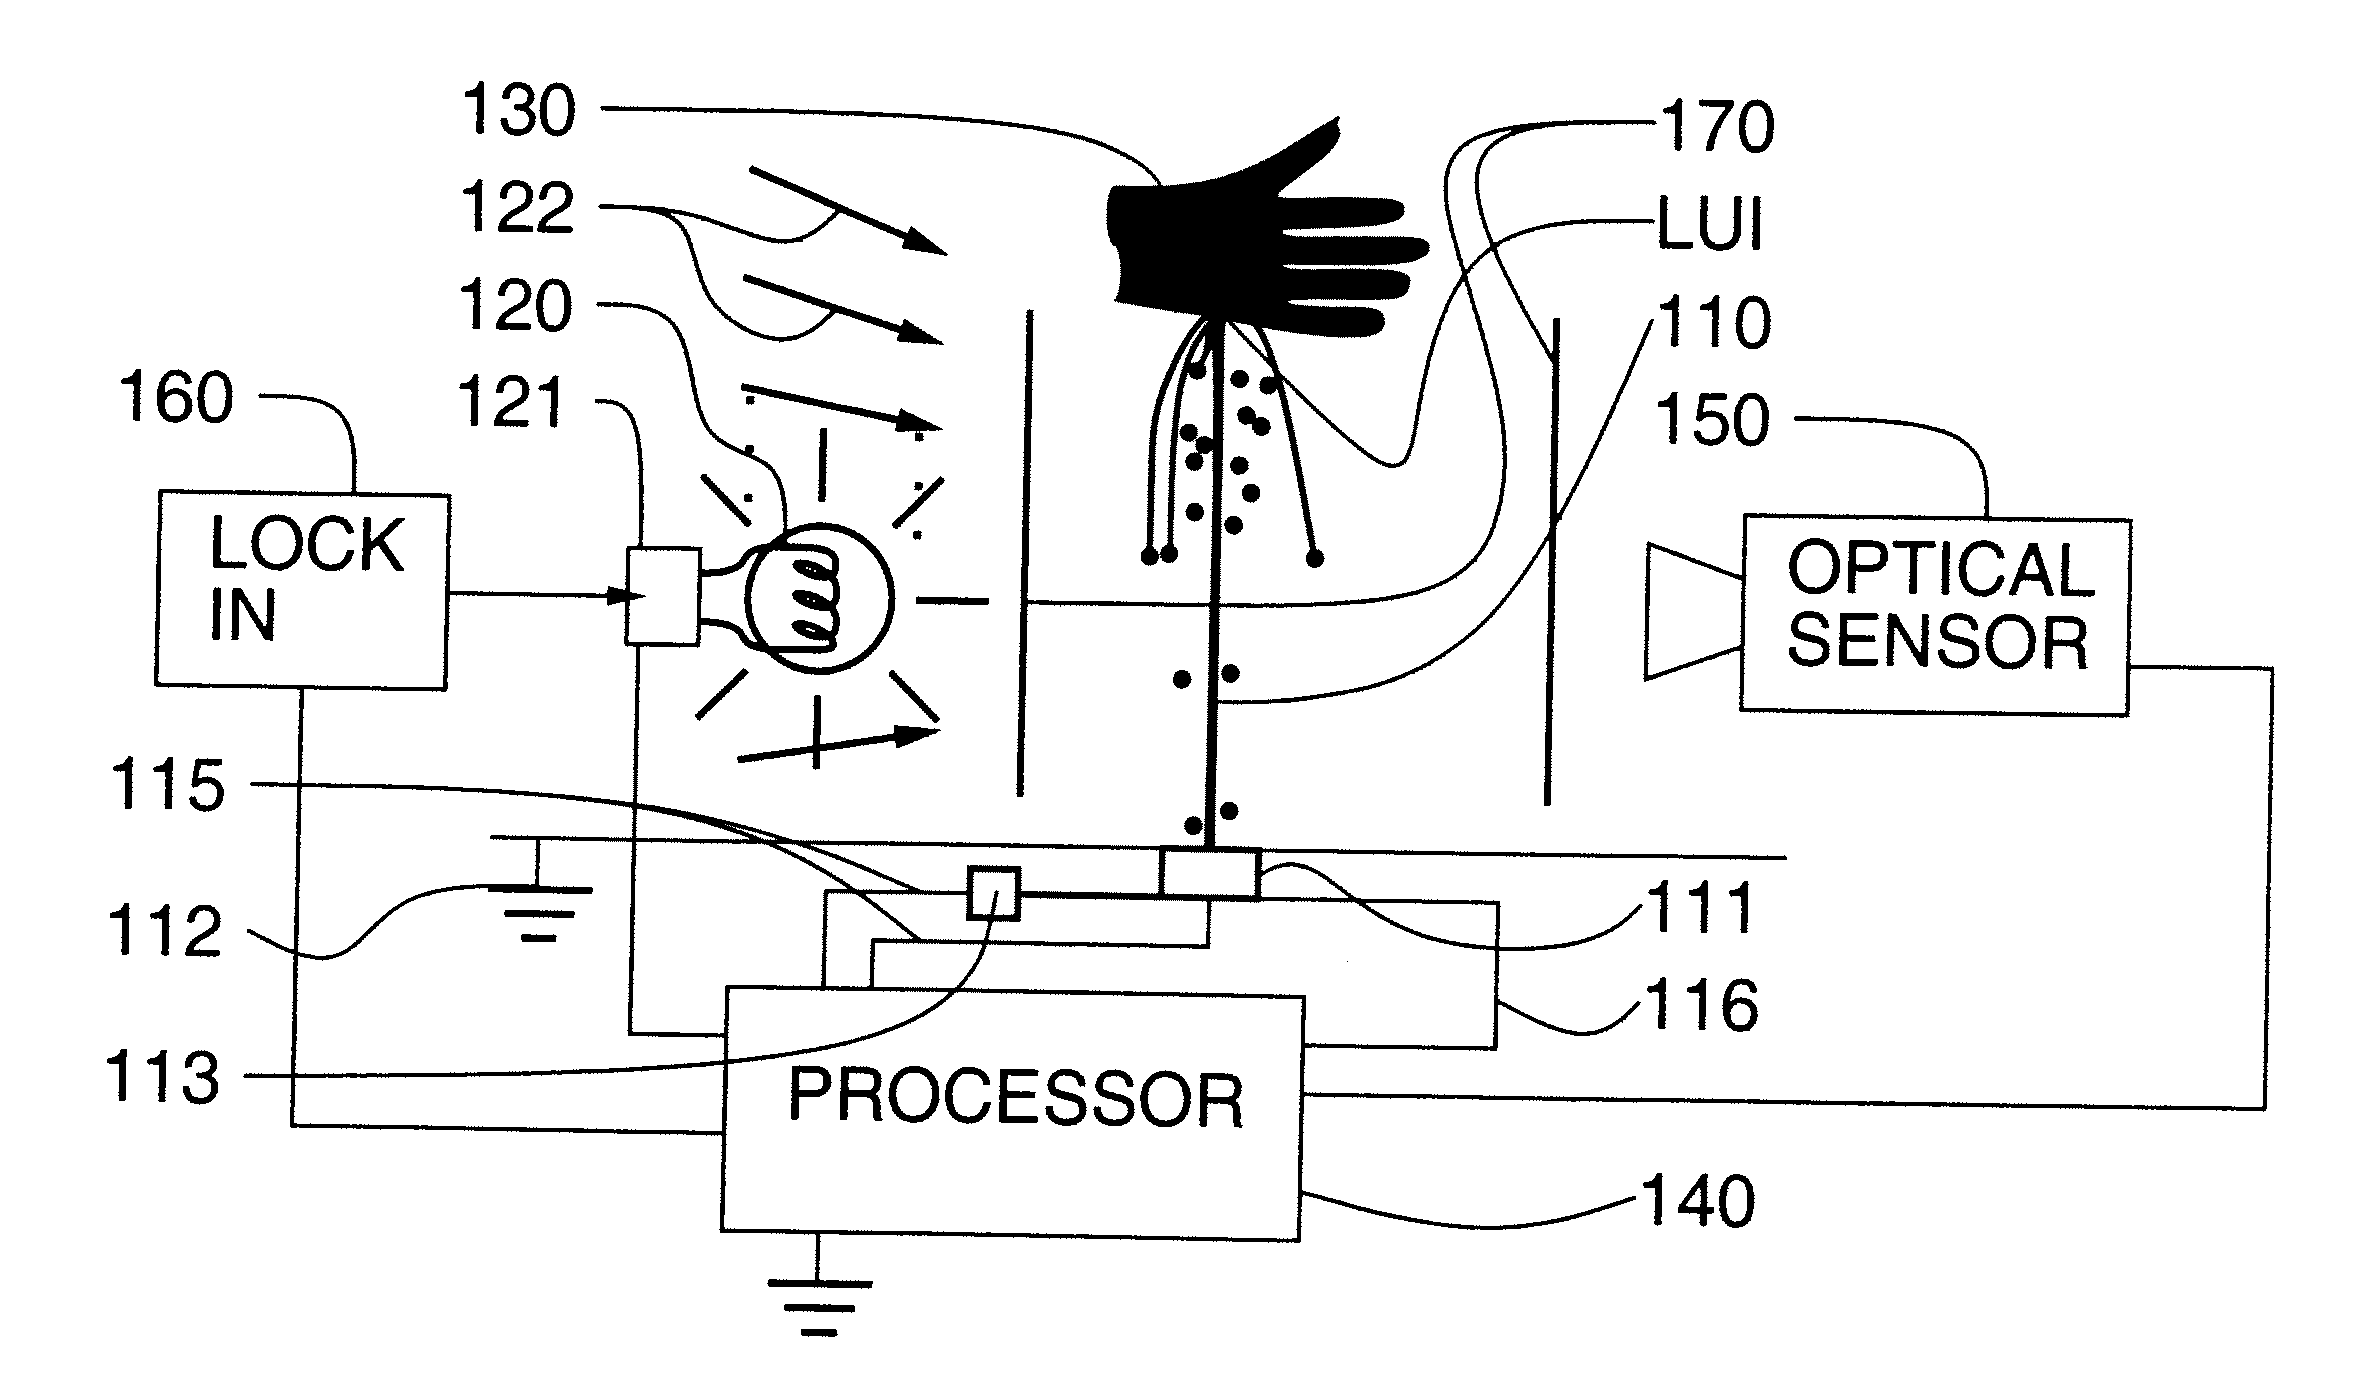 Fluid user interface such as immersive multimediator or iinput/output device with one or more spray jets